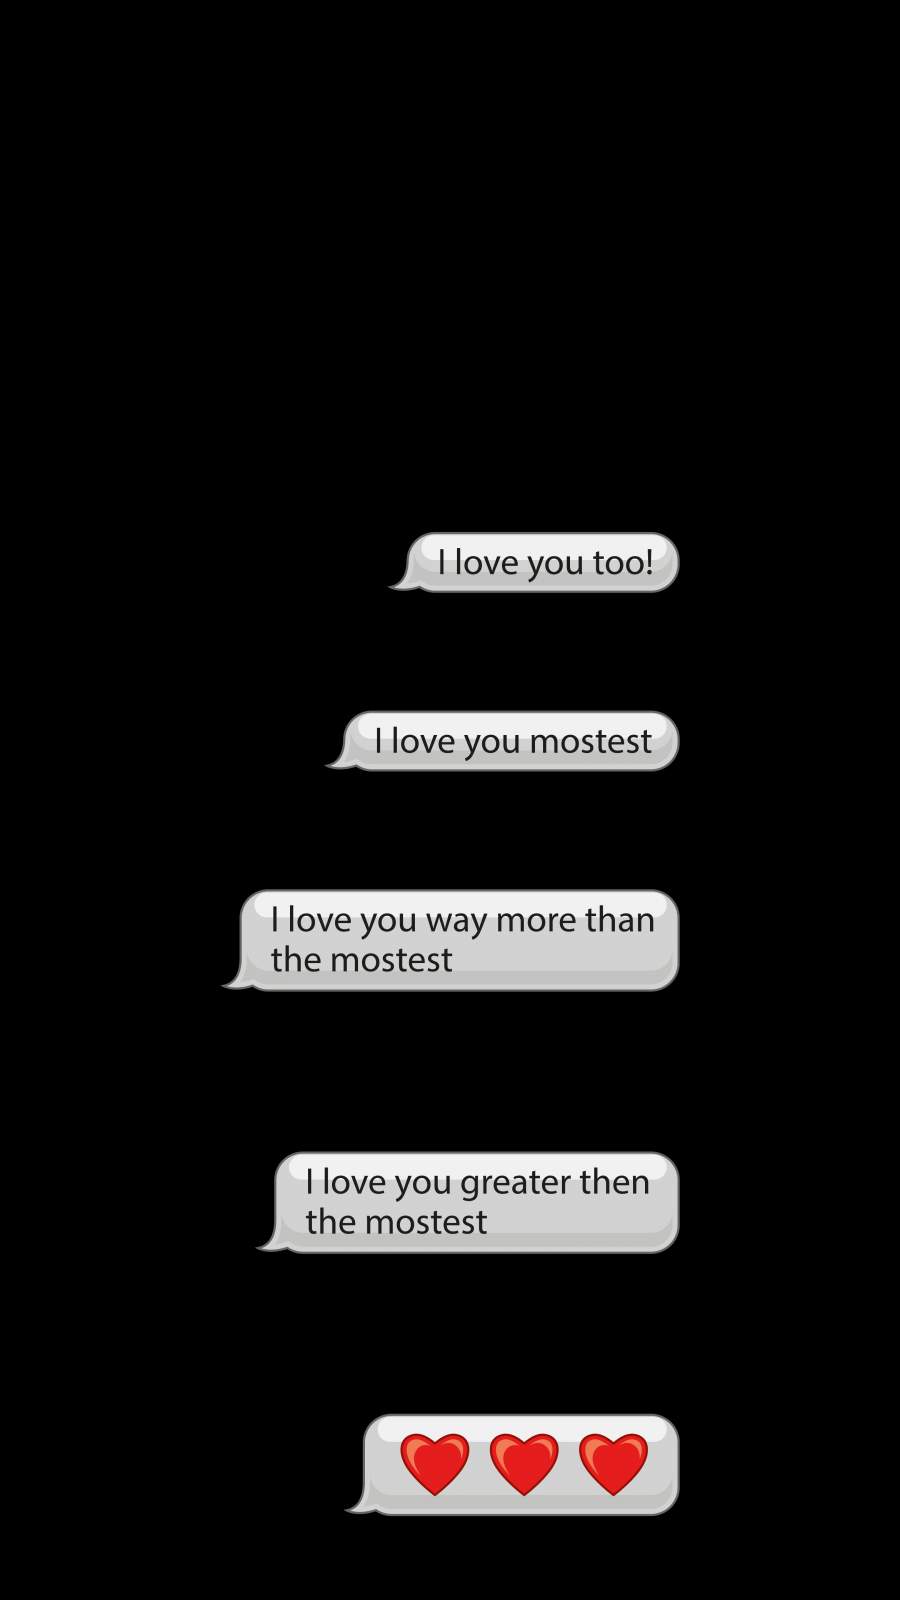 I Love You Chat - IPhone Wallpapers : iPhone Wallpapers